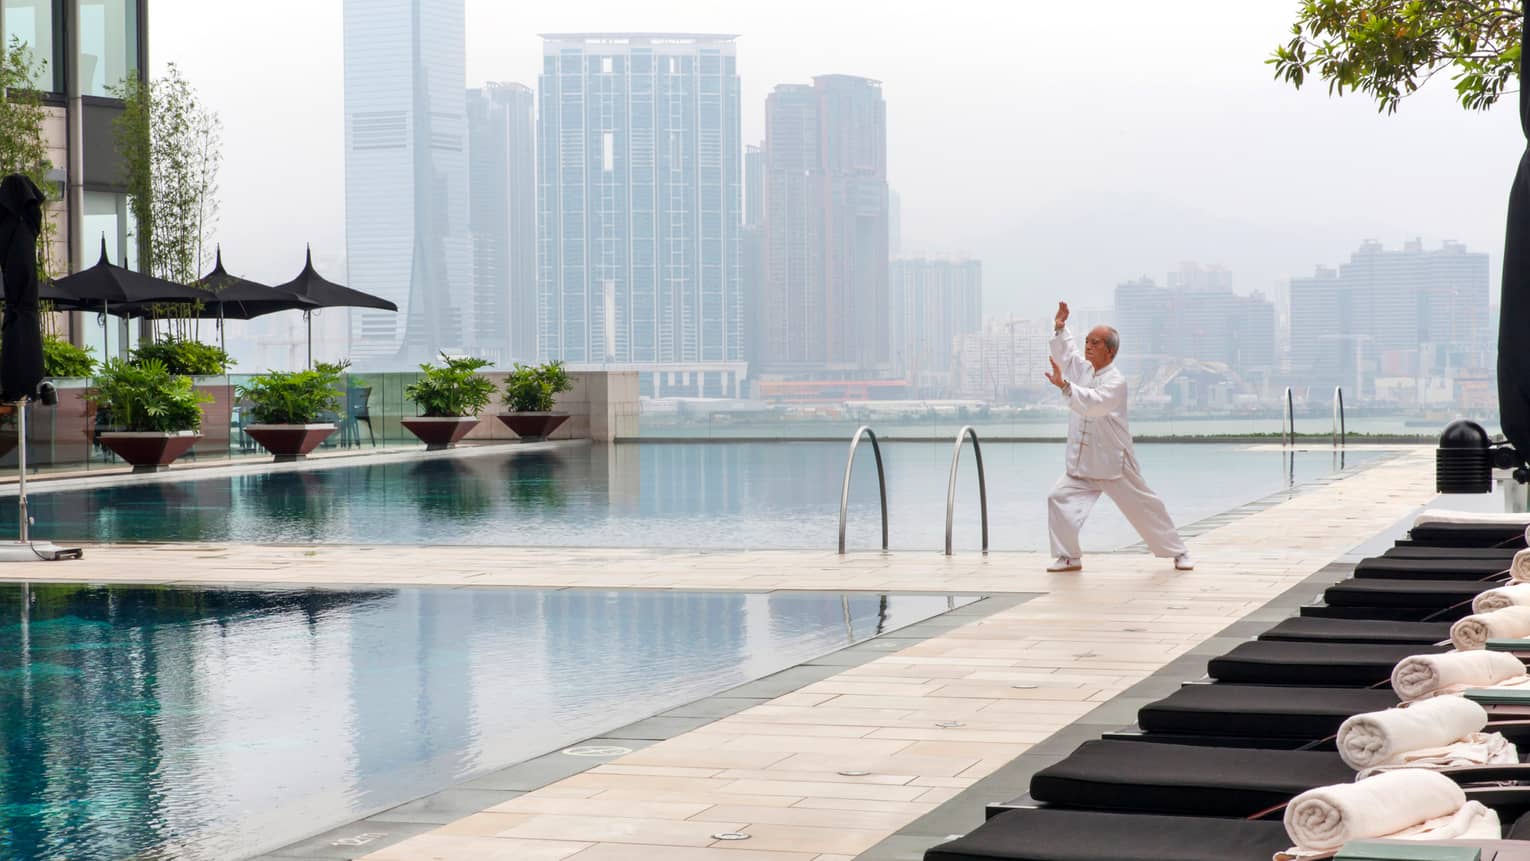 Tai Chi master wearing white holds pose on patio deck by swimming pools, misty skyline